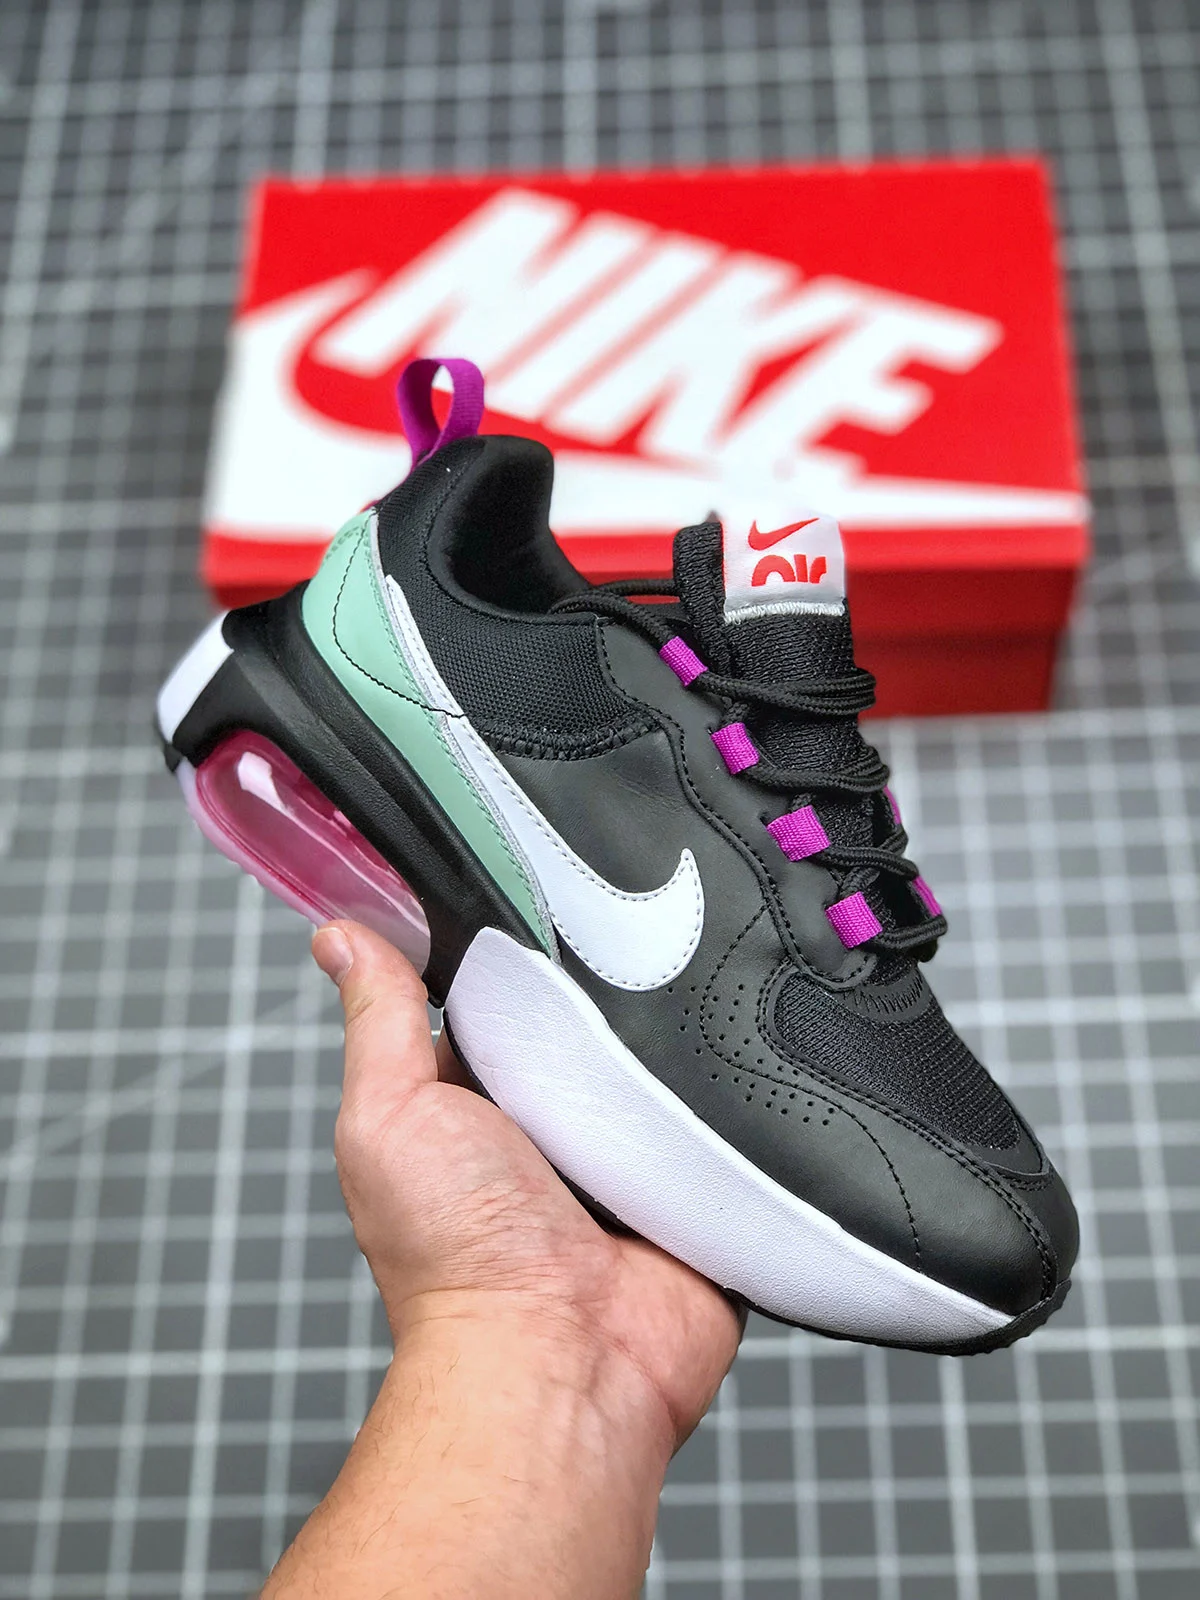 Nike WMNS Air Max Verona Black Summit White-Fire Pink For Sale